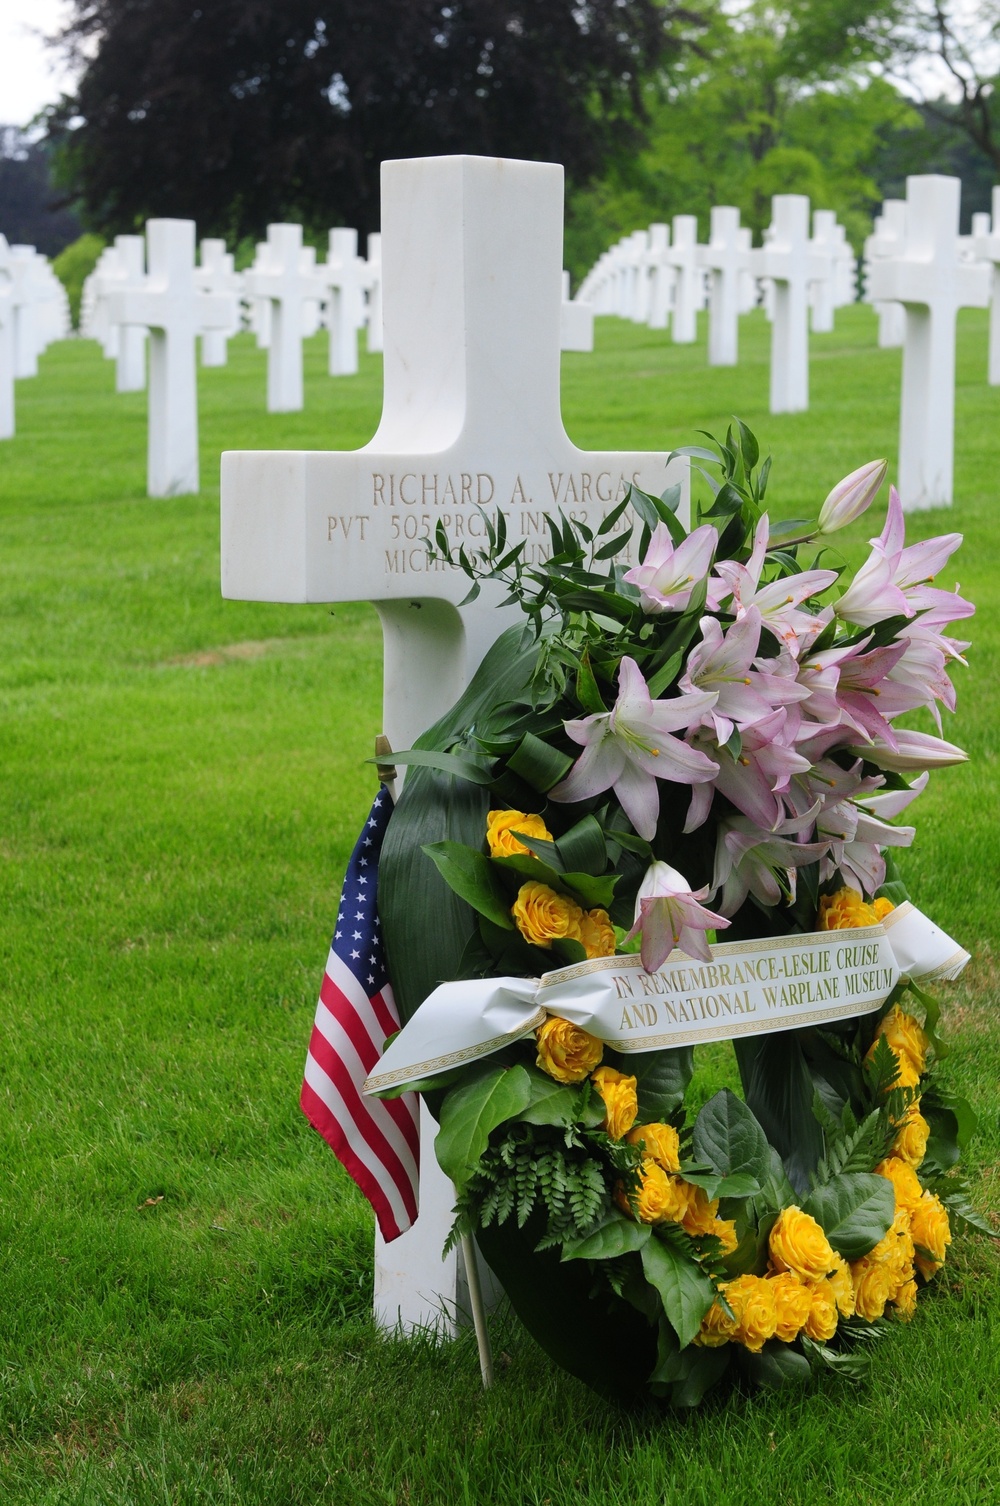 89-year-old WWII veteran honors fallen comrade in France